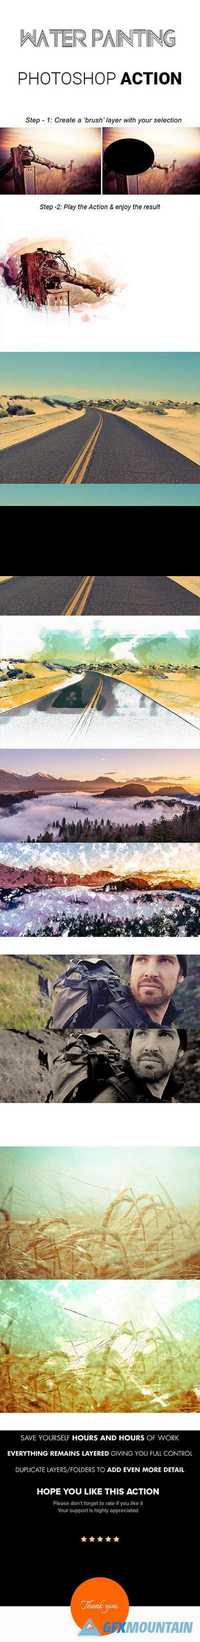 GraphicRiver - Water Painting Photoshop Action 16273705